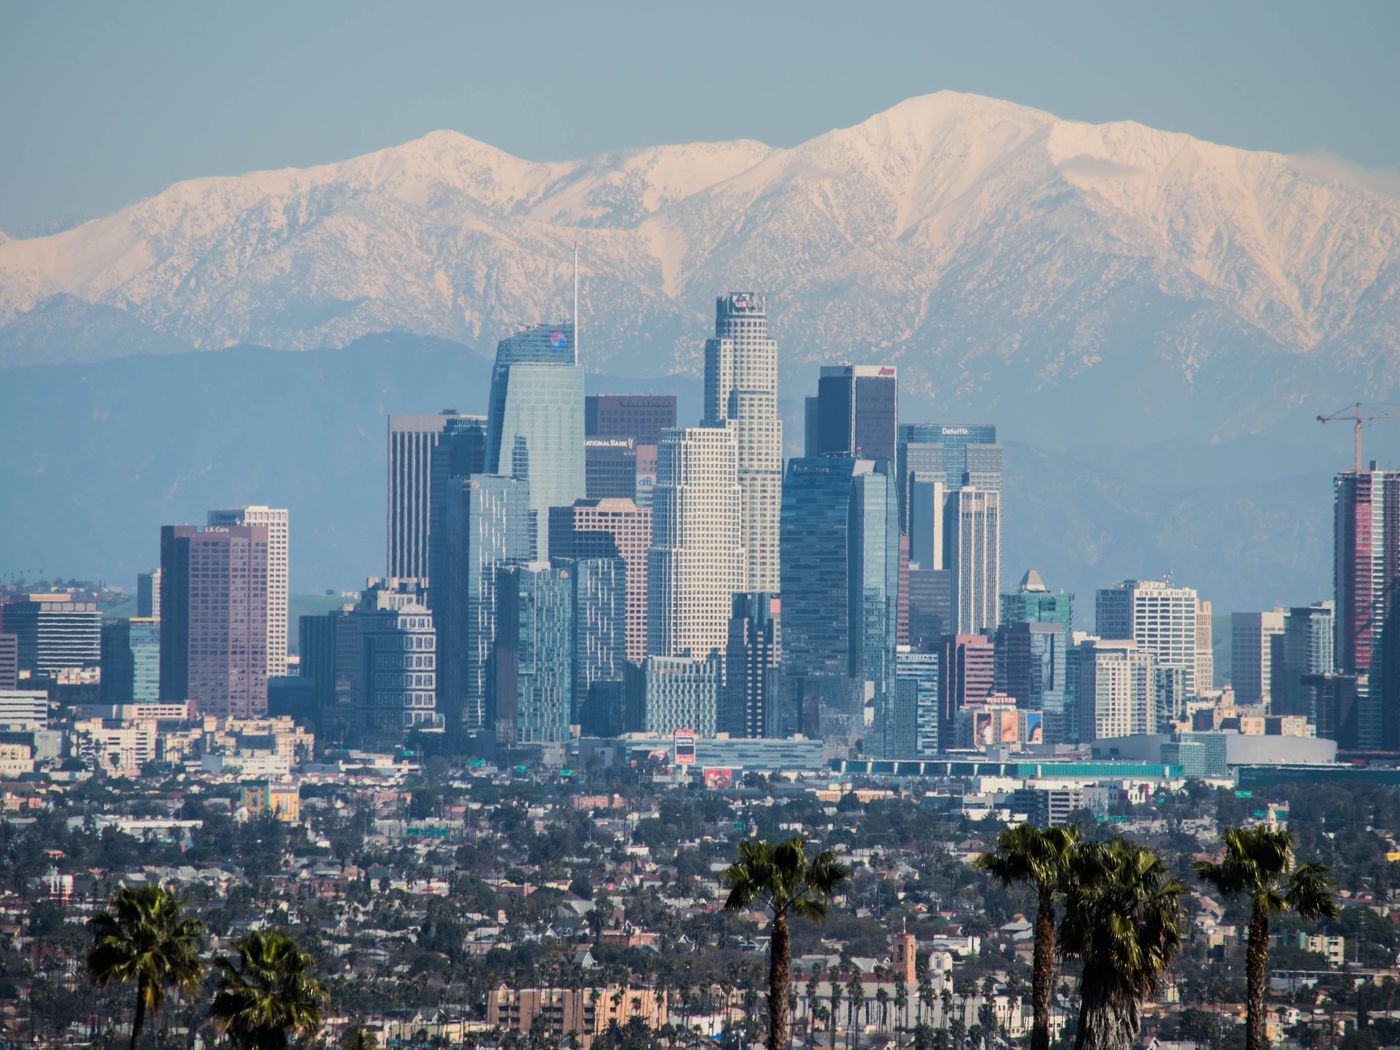 See how much LA's skyline changed in 10 years